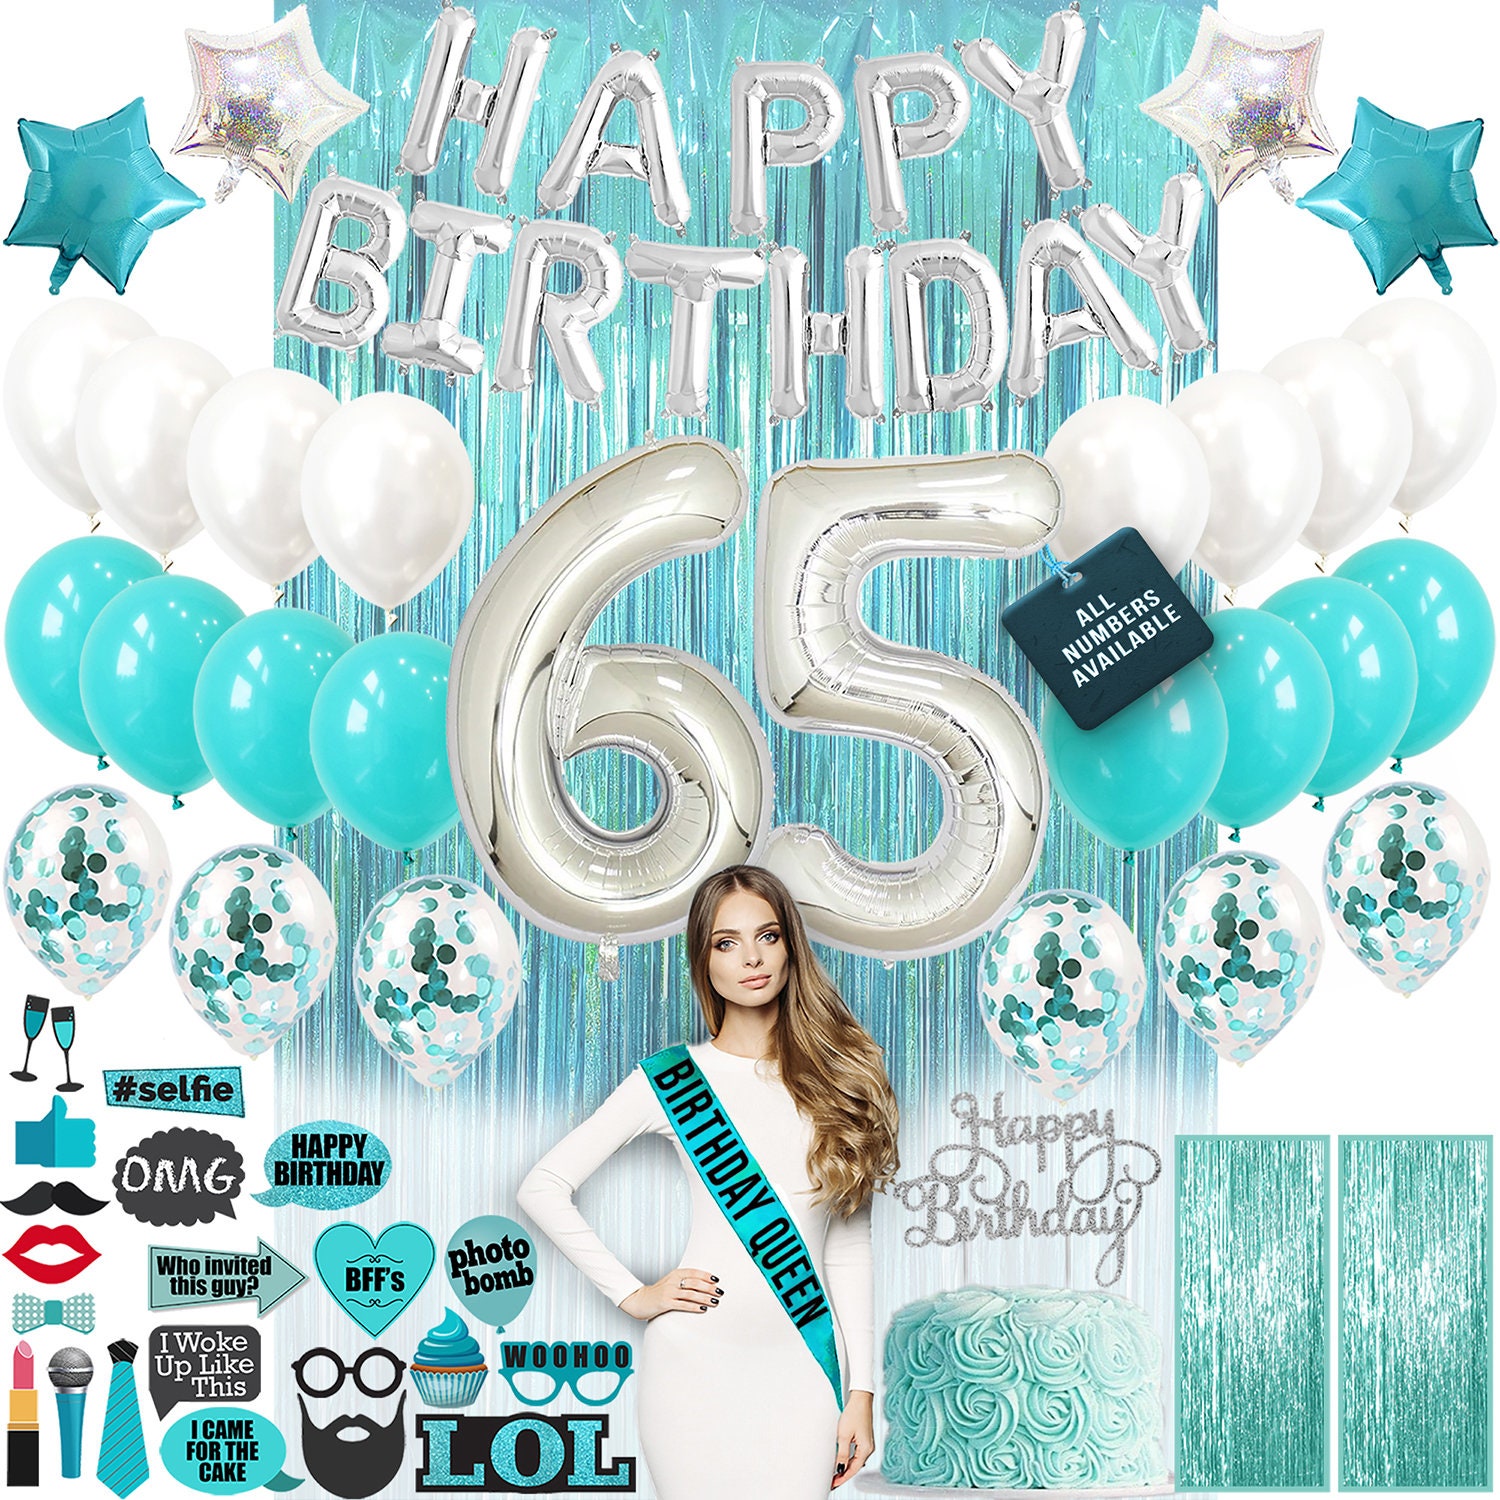 65th Birthday Decorations, 65th Birthday Party Supplies, 65th Birthday Banner Teal Green, Confetti Balloons Her, 65 Cake Topper, 65th Gifts - Walmart.com